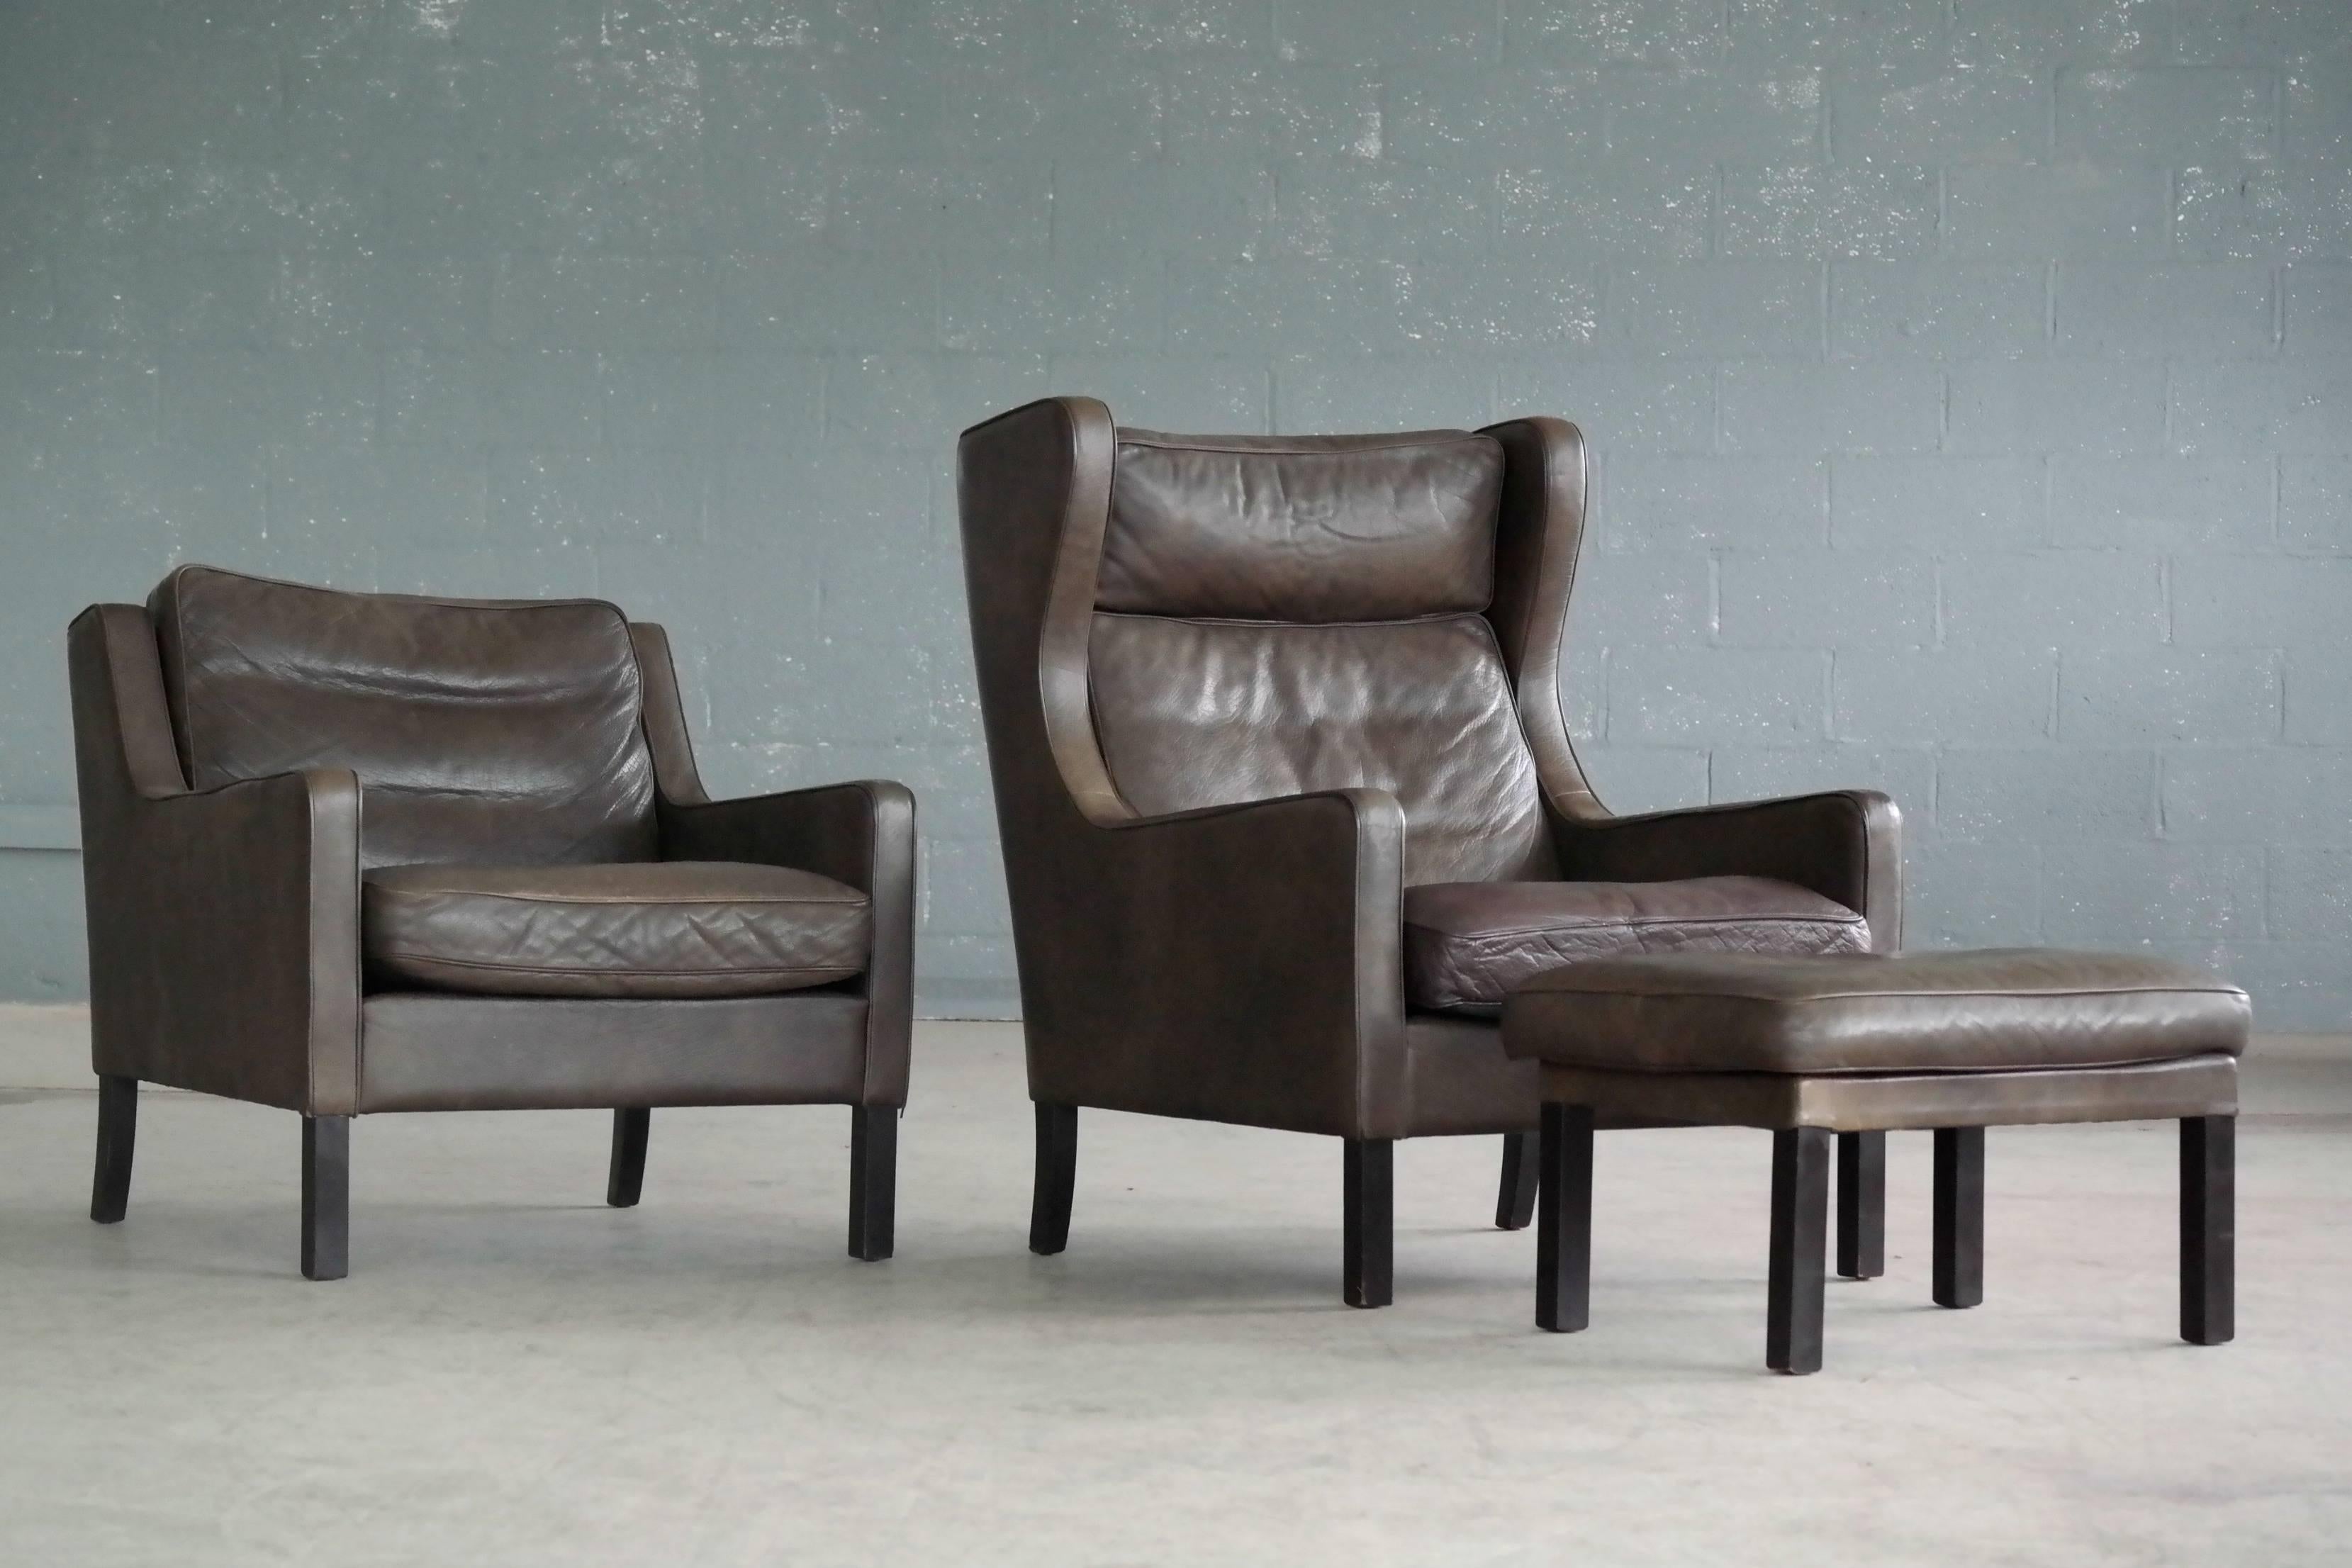 Scandinavian Modern Børge Mogensen Style Pair of Lounge Chairs and Ottoman in Dark Olive Leather